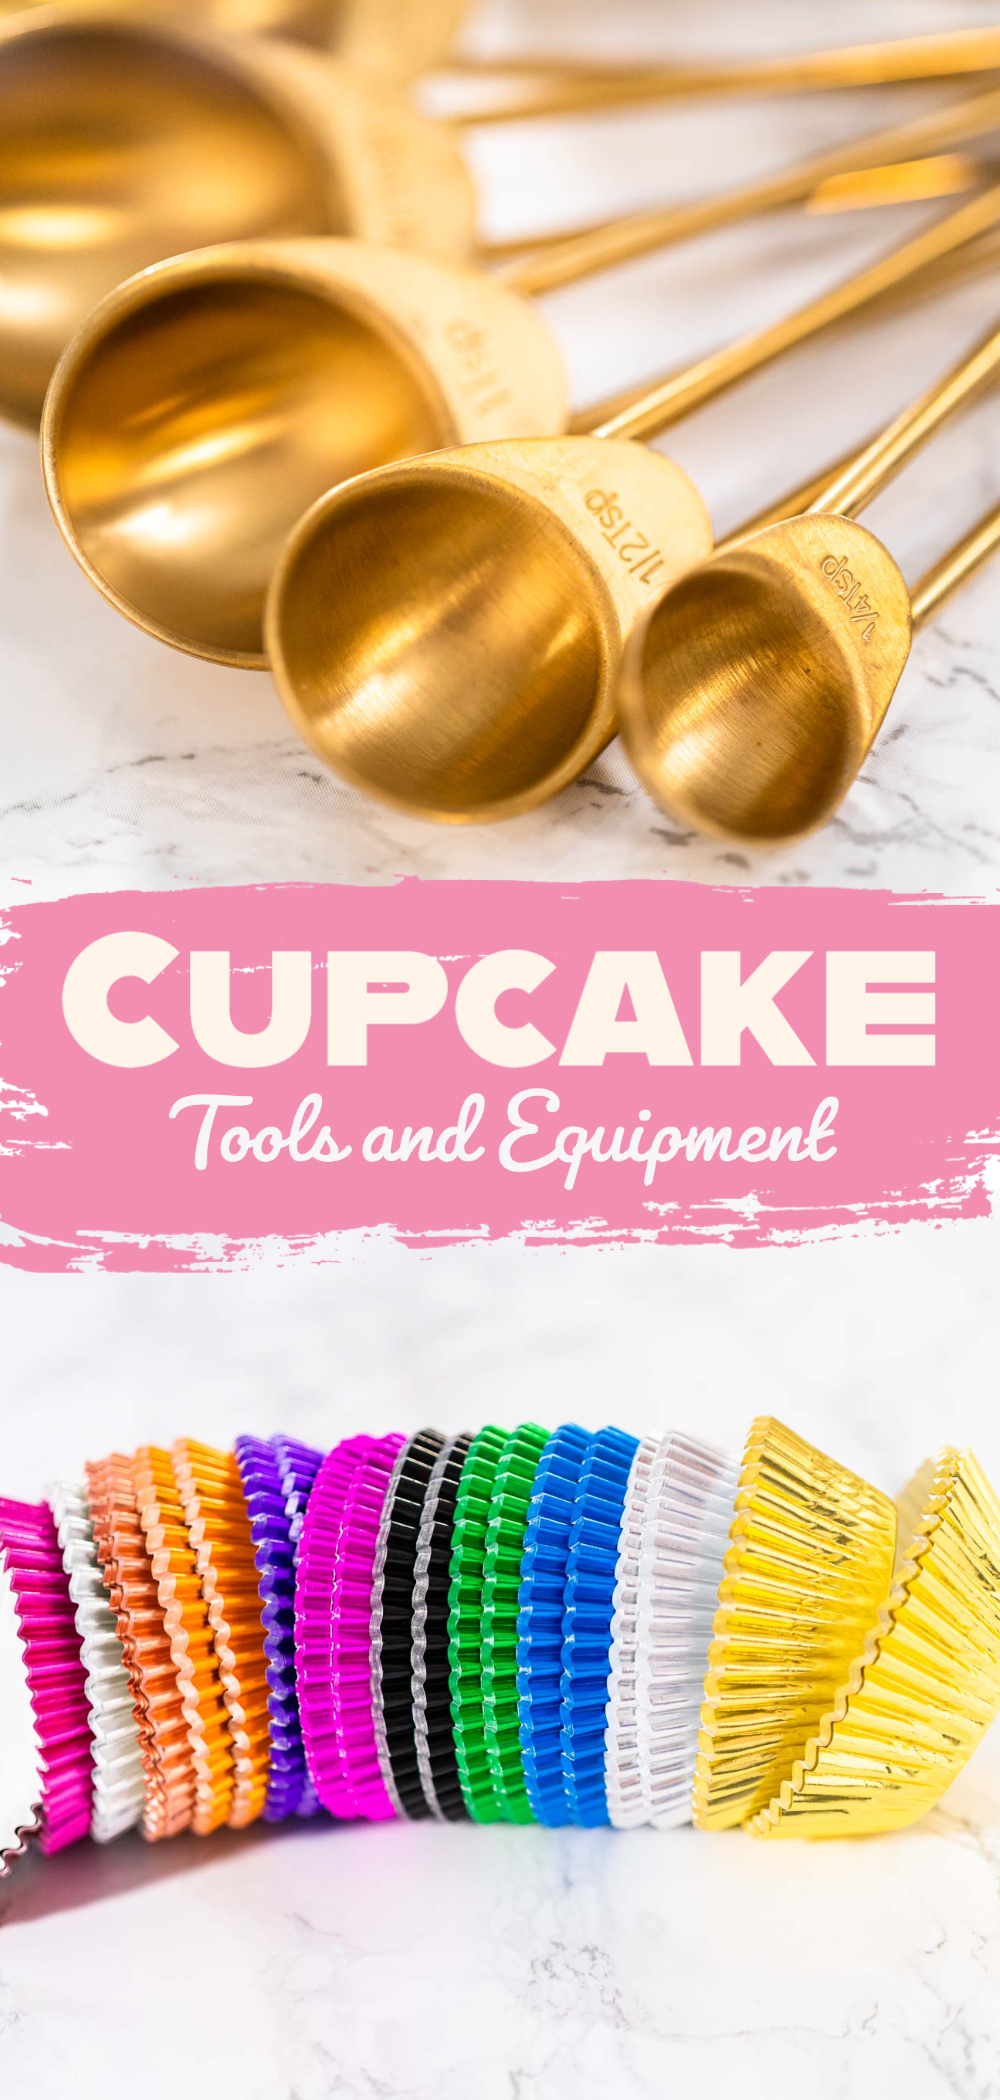 Cupcake Tools and Equipment